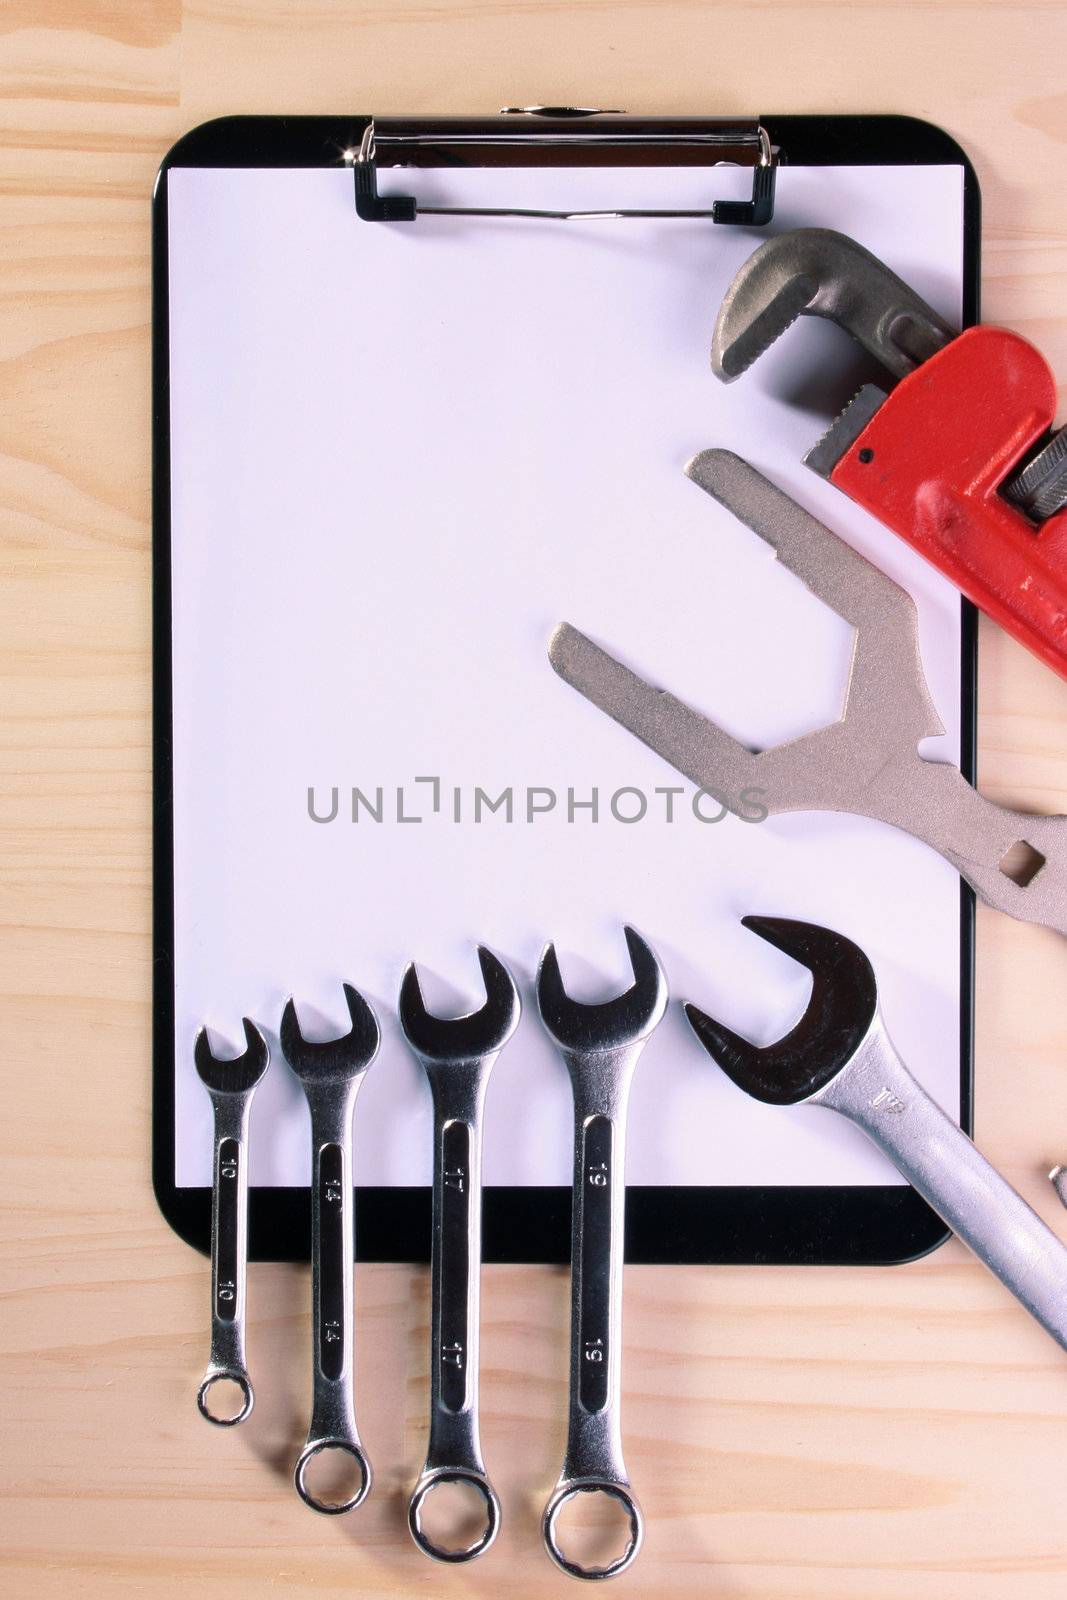 Set of wrenches by VIPDesignUSA